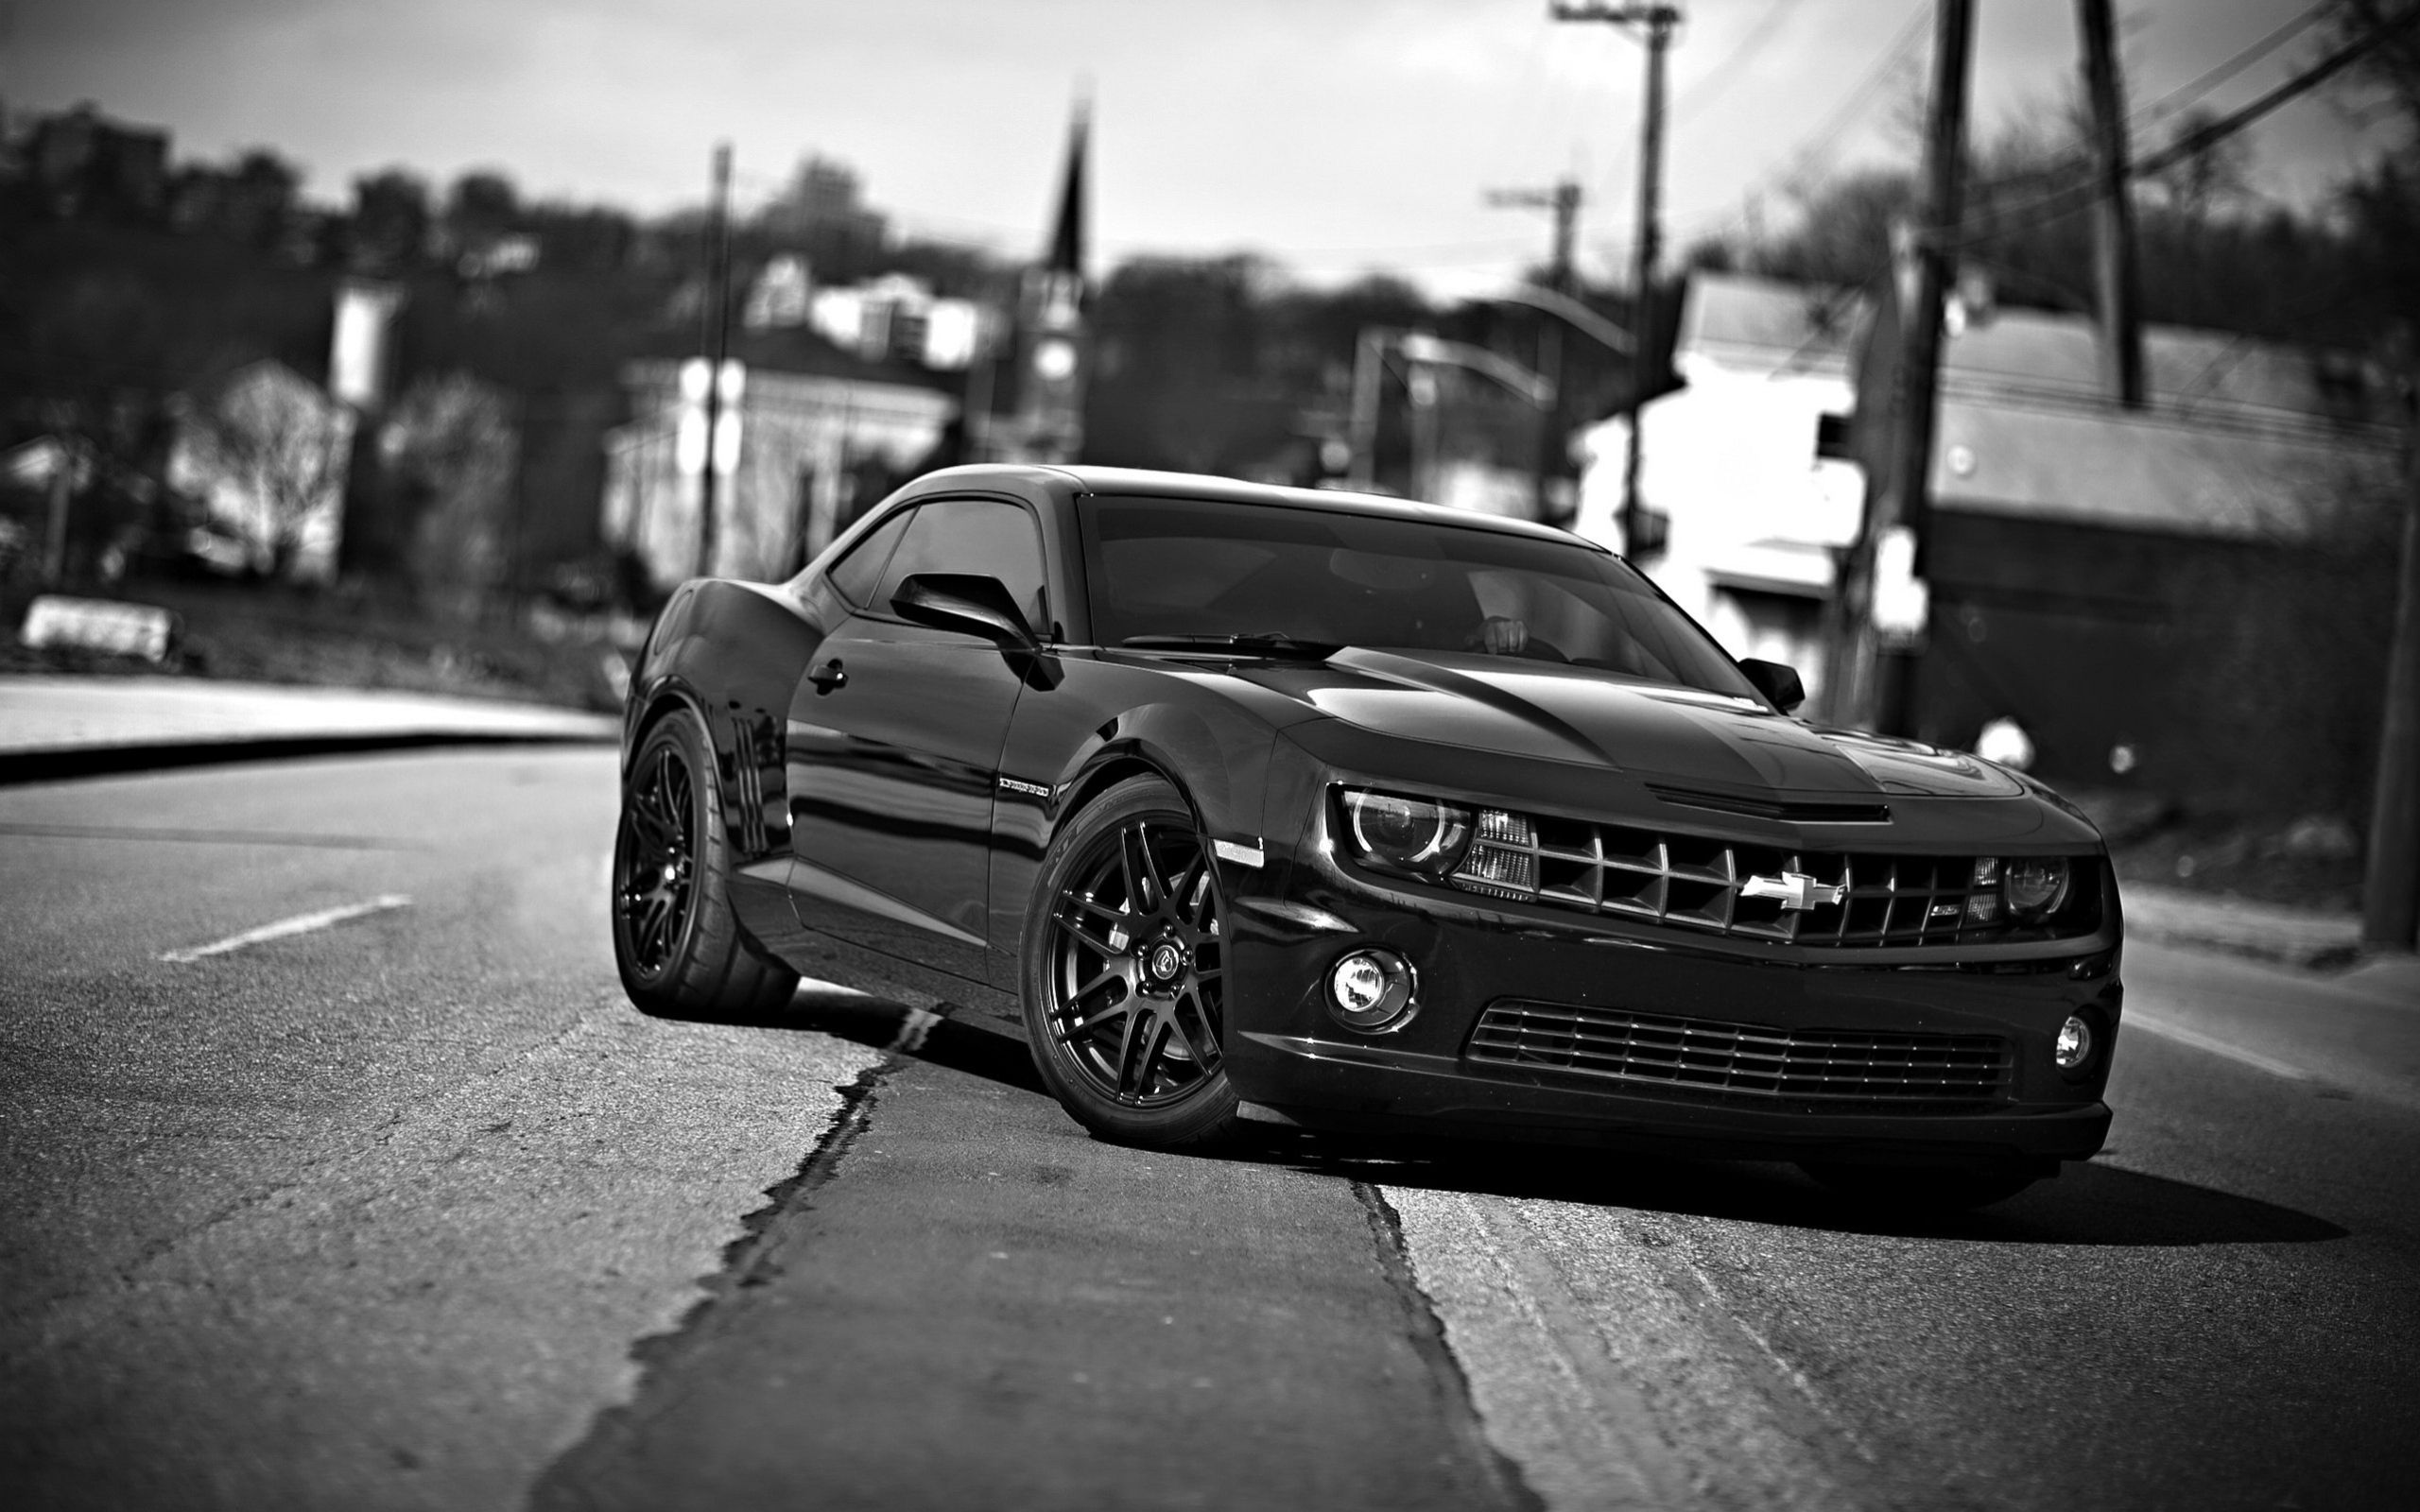 Images & Pictures cars, chb, front view, bw Chevrolet